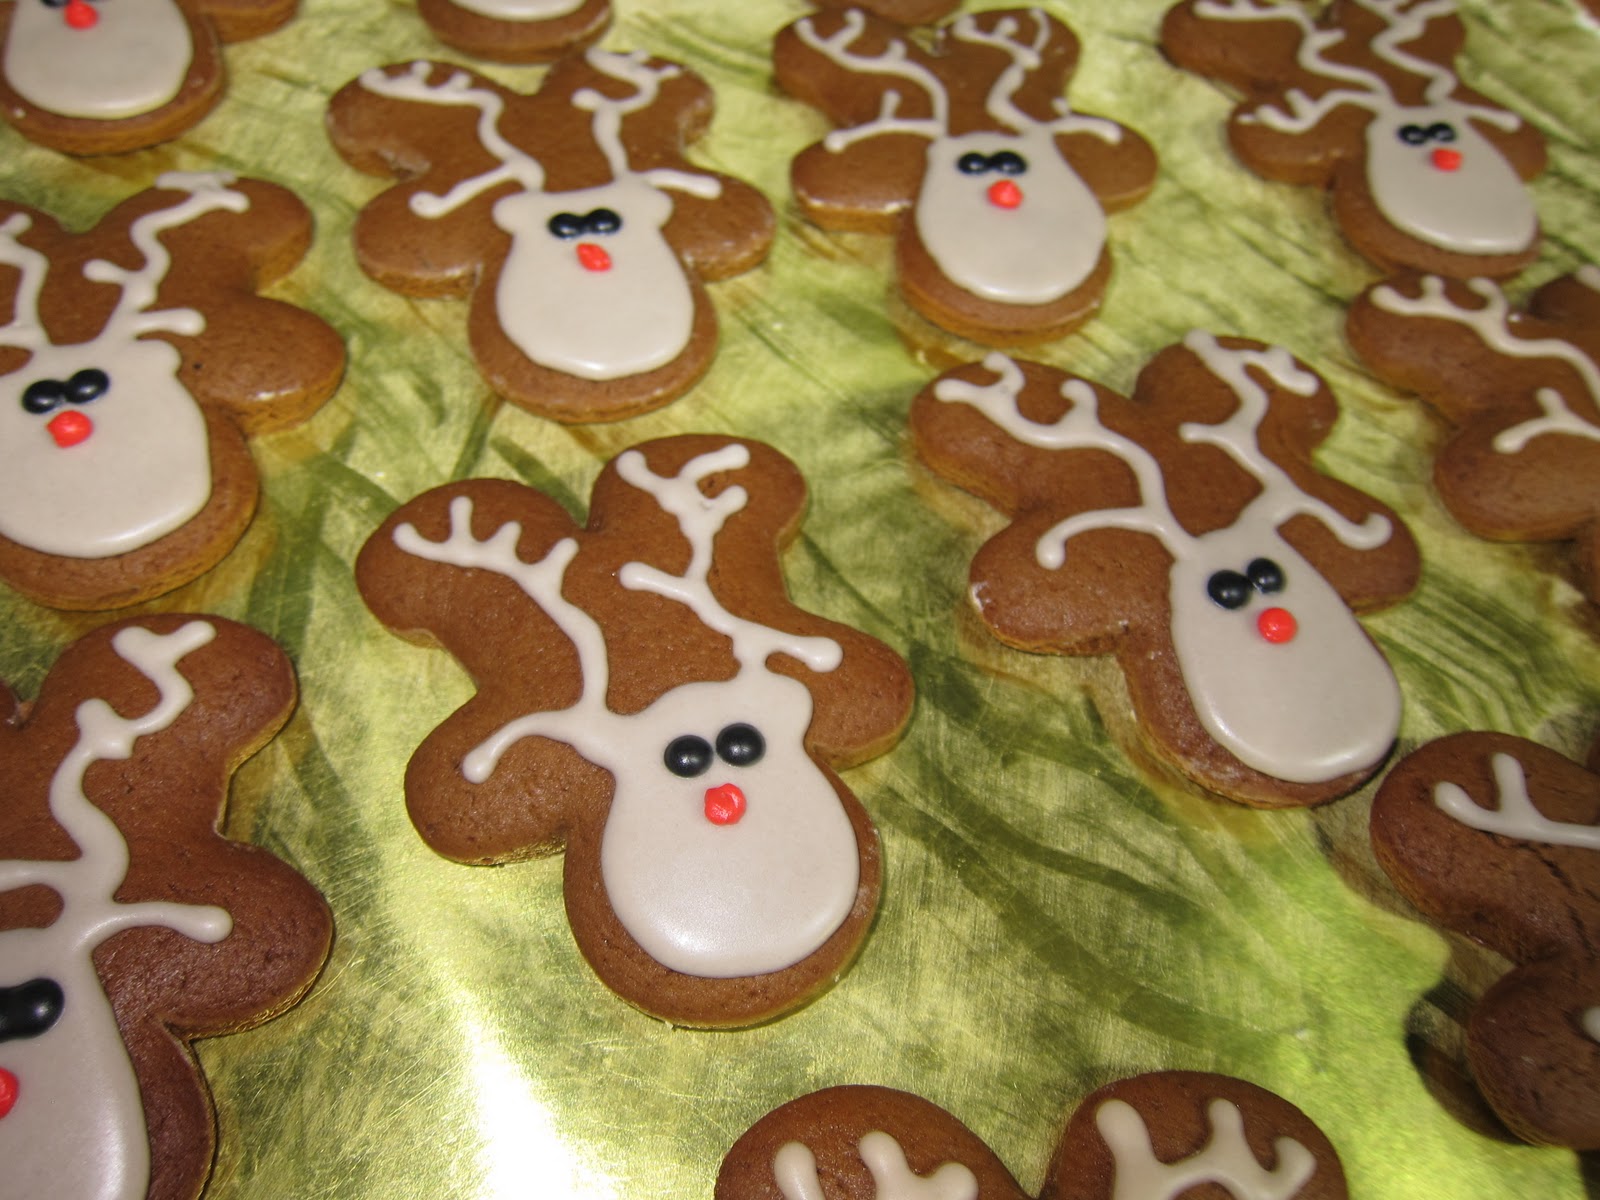 The Cookie Cat bakes from home!: More bakes for Christmas